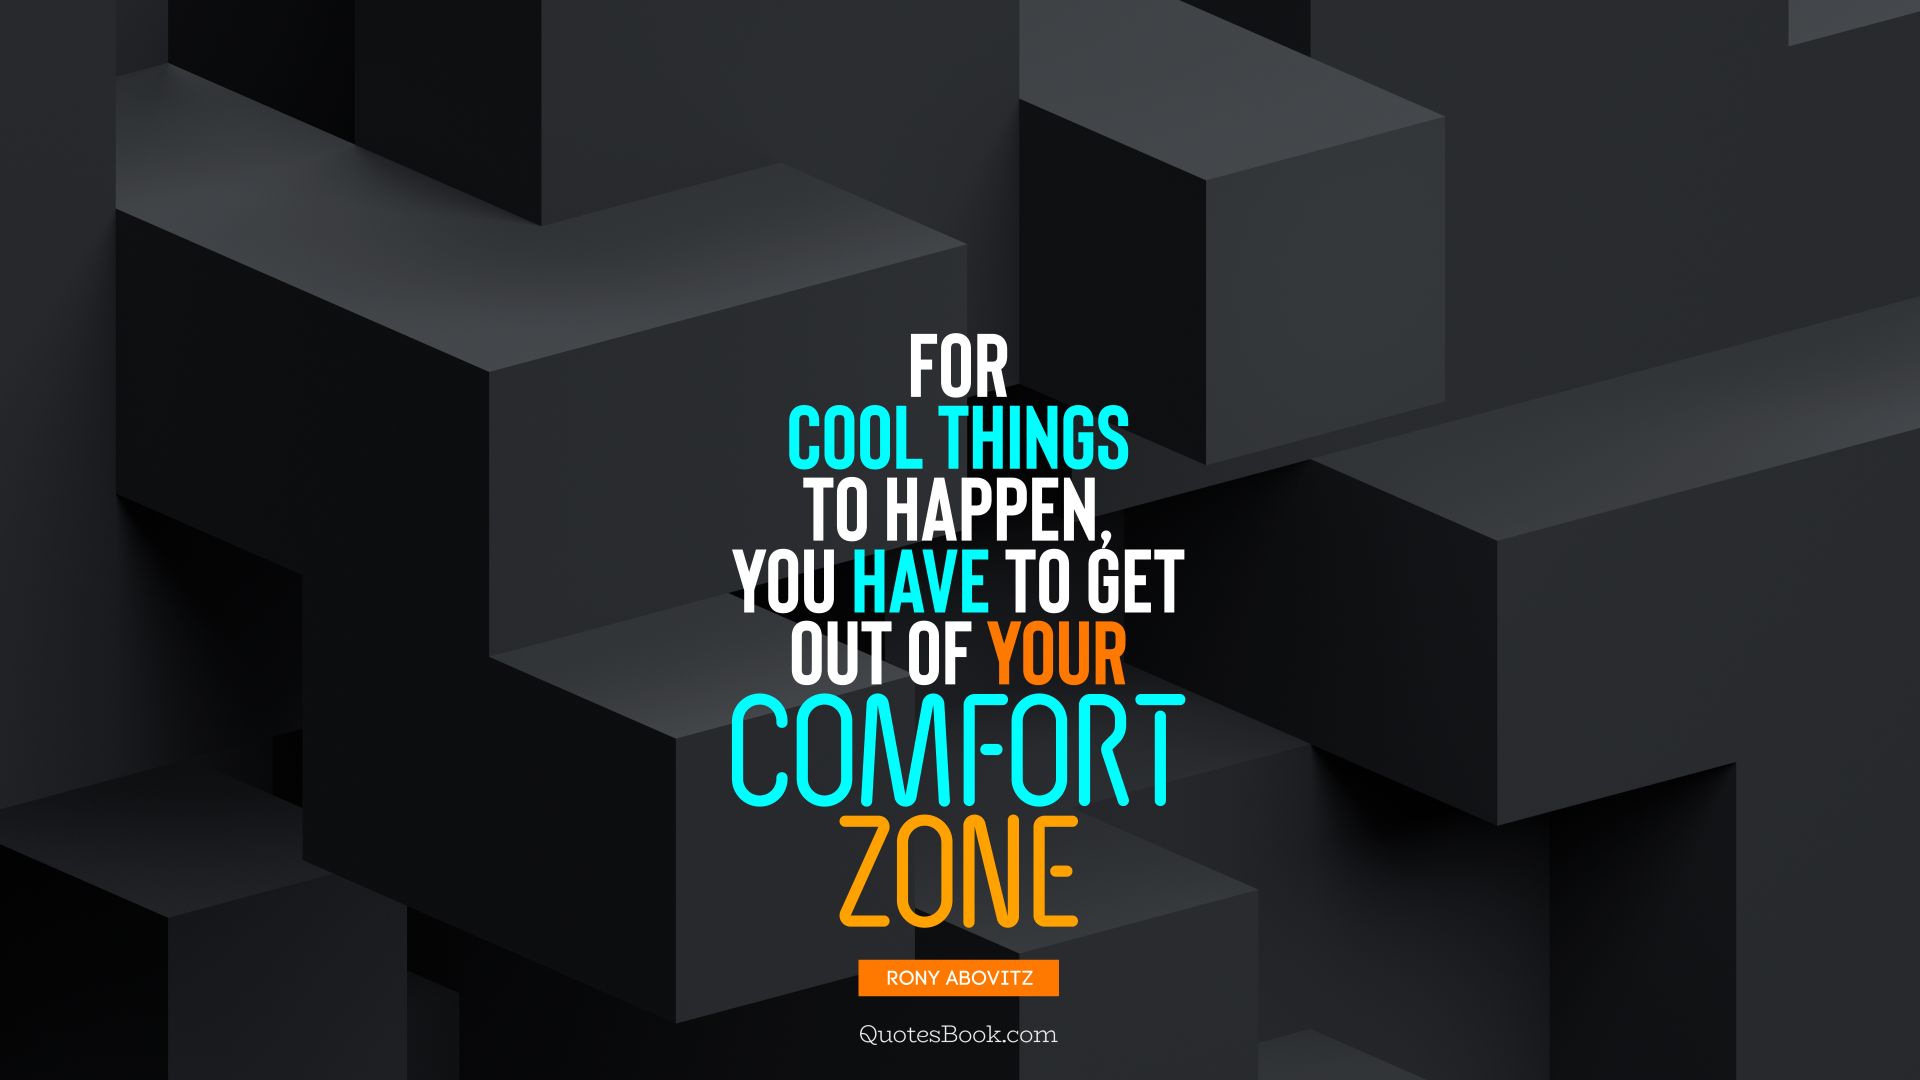 For cool things to happen, you have to get out of your comfort zone. - Quote by Rony Abovitz